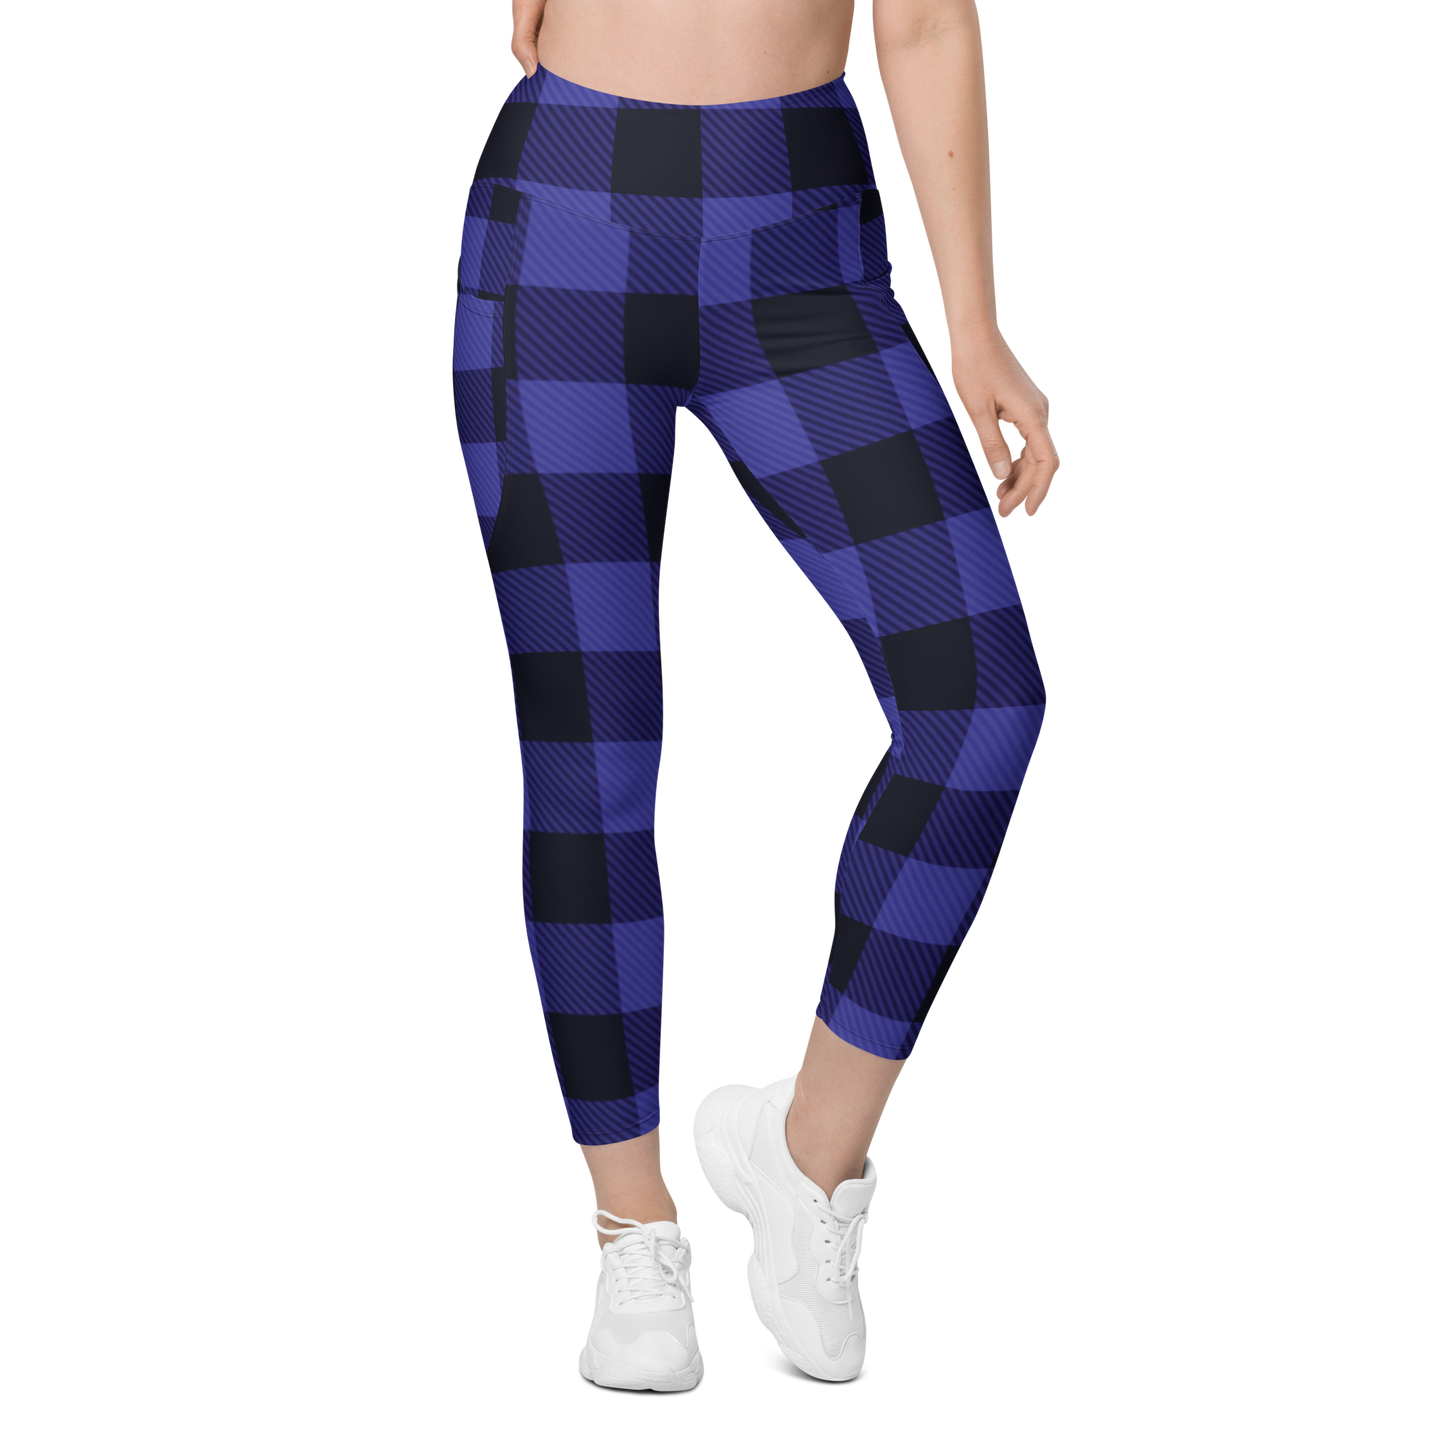 Leggings with pockets in blue & black plaid - familiar...yet different